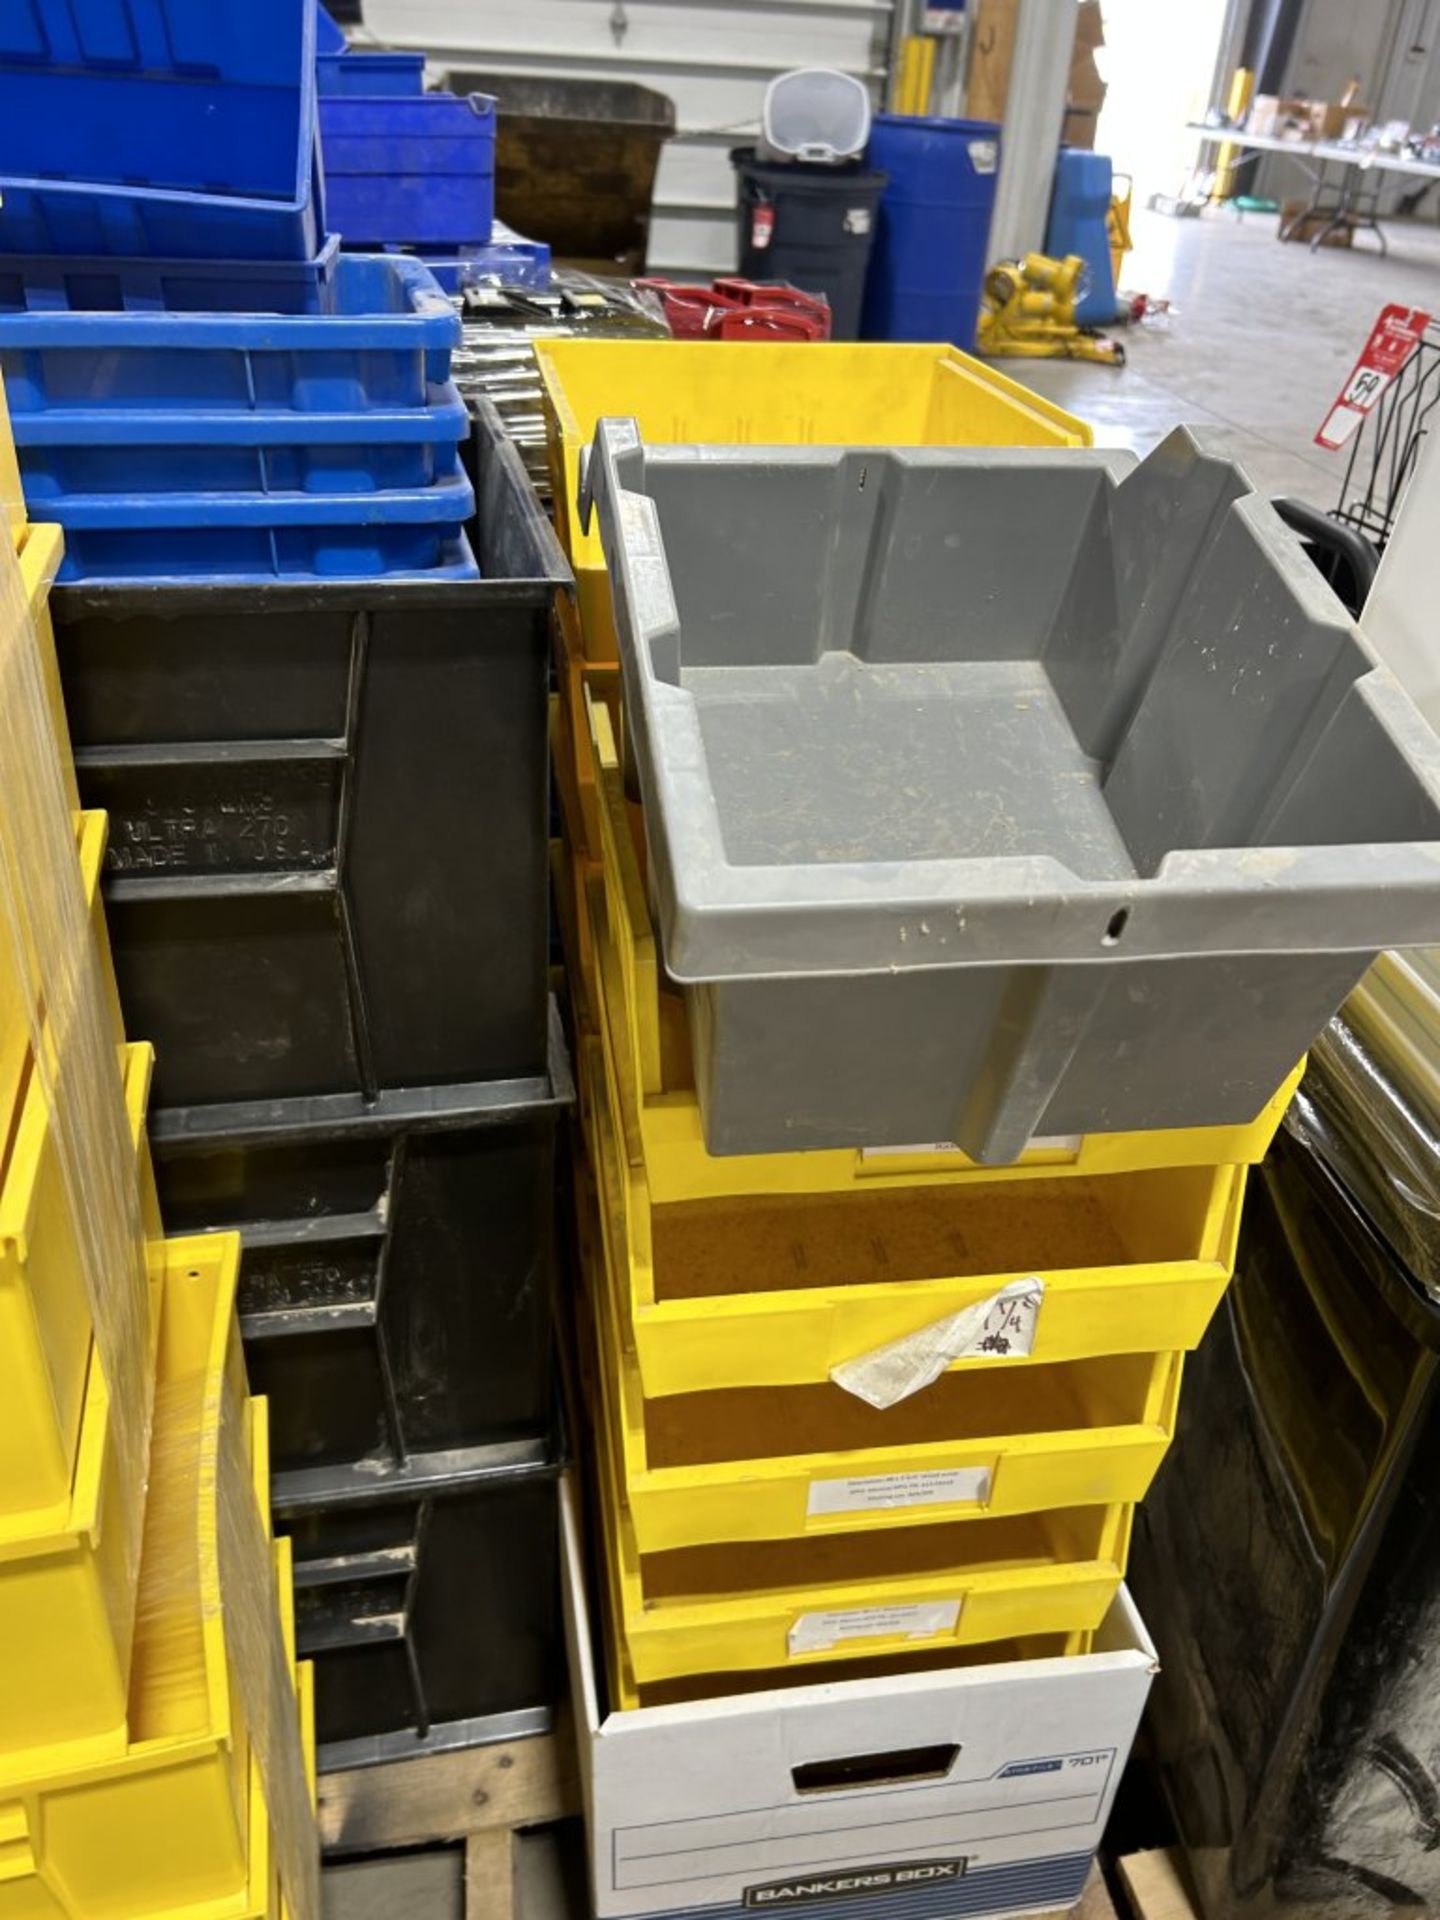 LARGE PALLET FULL OF ASSORTED PLASTIC BINS, STACKABLE, ASSORTED SIZES - Image 6 of 6